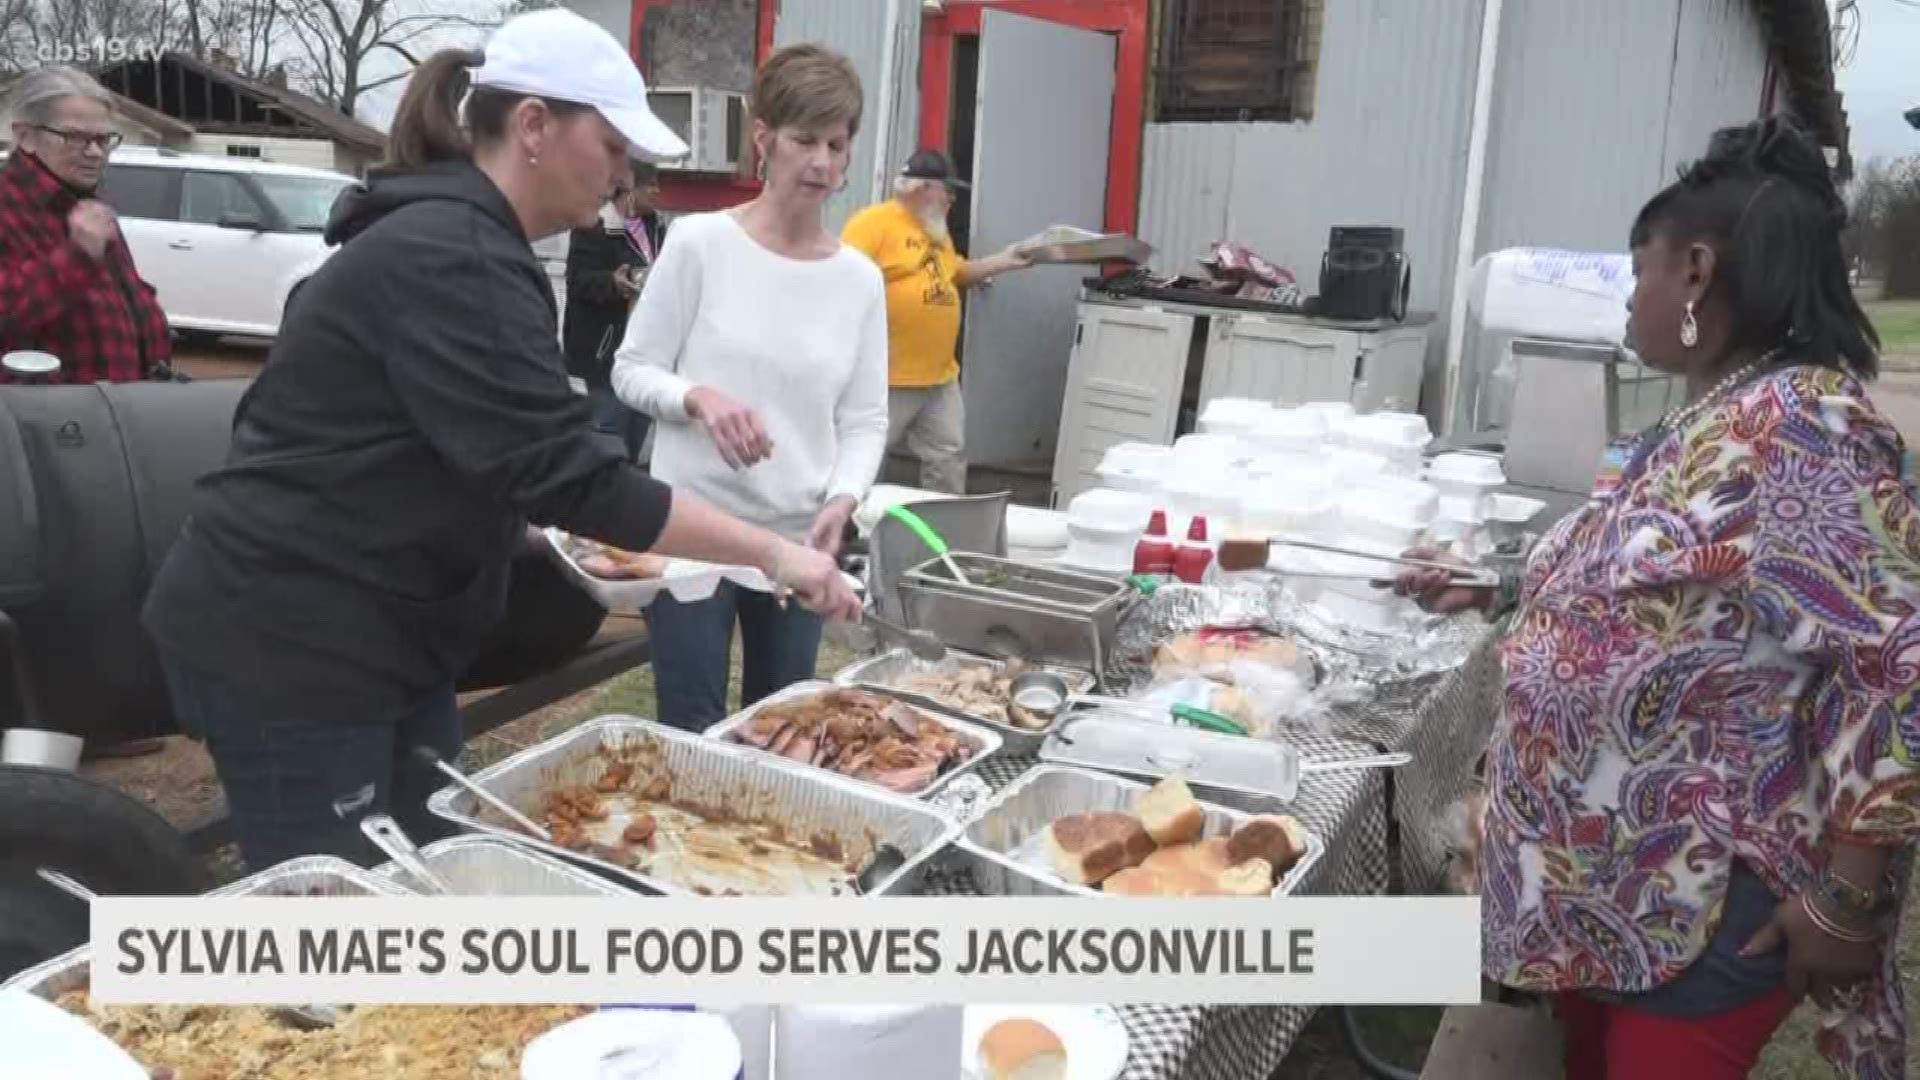 For the third year in a row, Sylvia Mae's Soul Food treated the community with free meals.